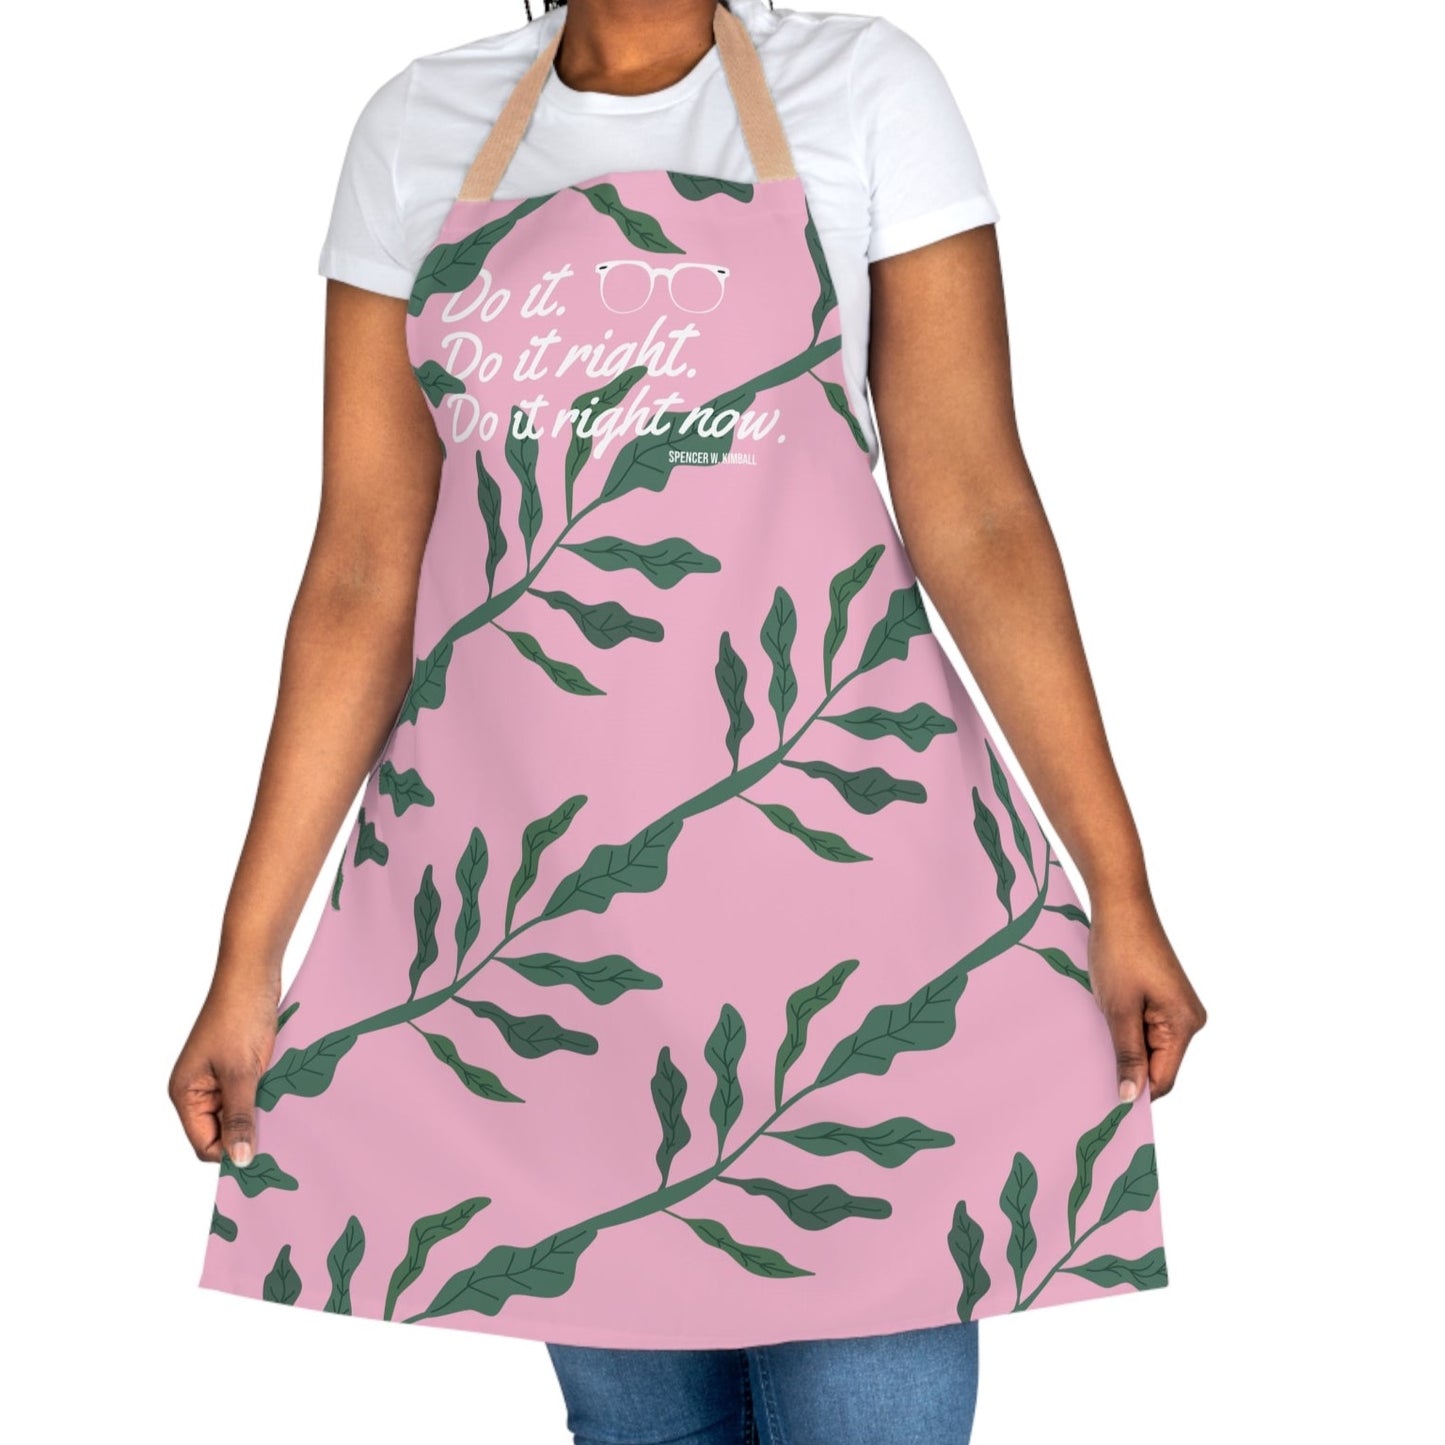 Cute LDS Womens Apron Spencer W. Kimball "Do it. Do it right. Do it right now."